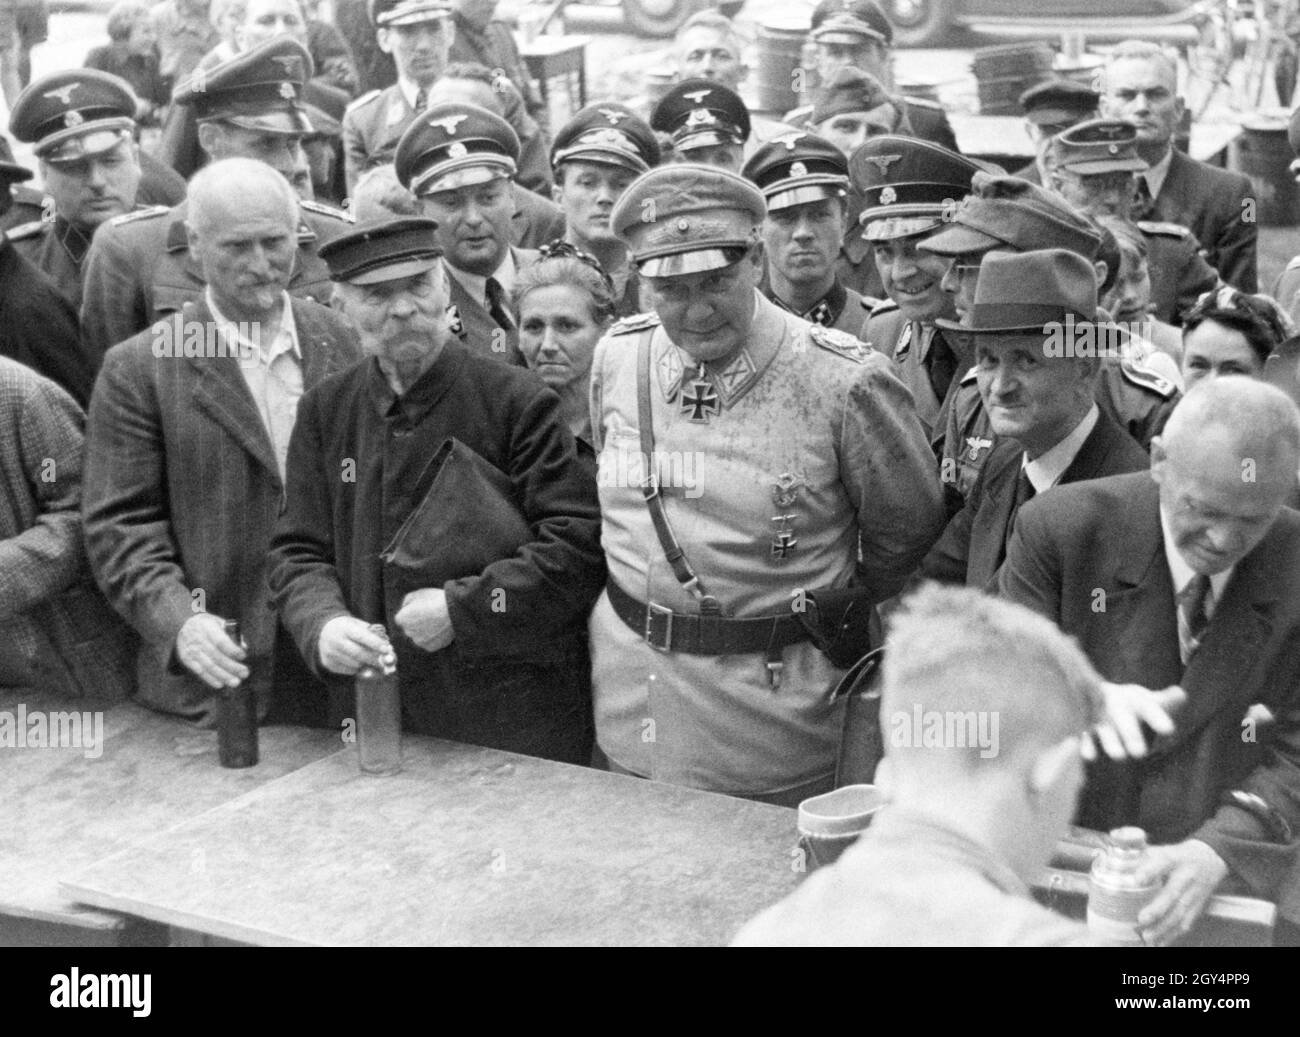 Hermann Göring (center) visited the Hanseatic city of Hamburg in 1943. There he saw for himself the aid measures that were available for the population. On the left behind Göring is Hamburg's Reichsstatthalter, Gauleiter Karl Kaufmann. [automated translation] Stock Photo